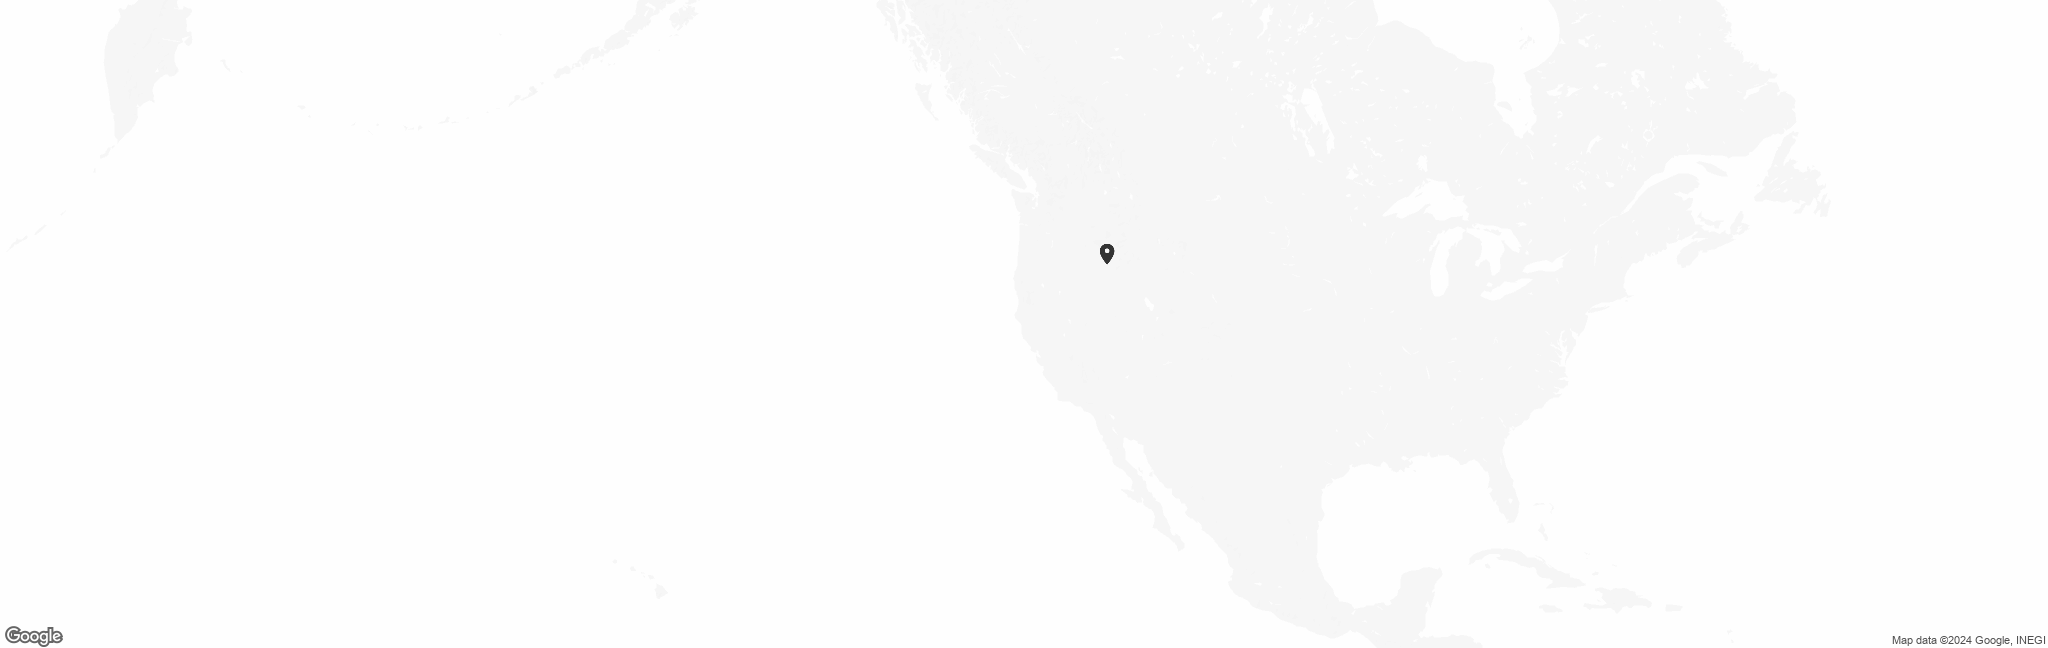 Map of US with pin of El-Ada Inc location